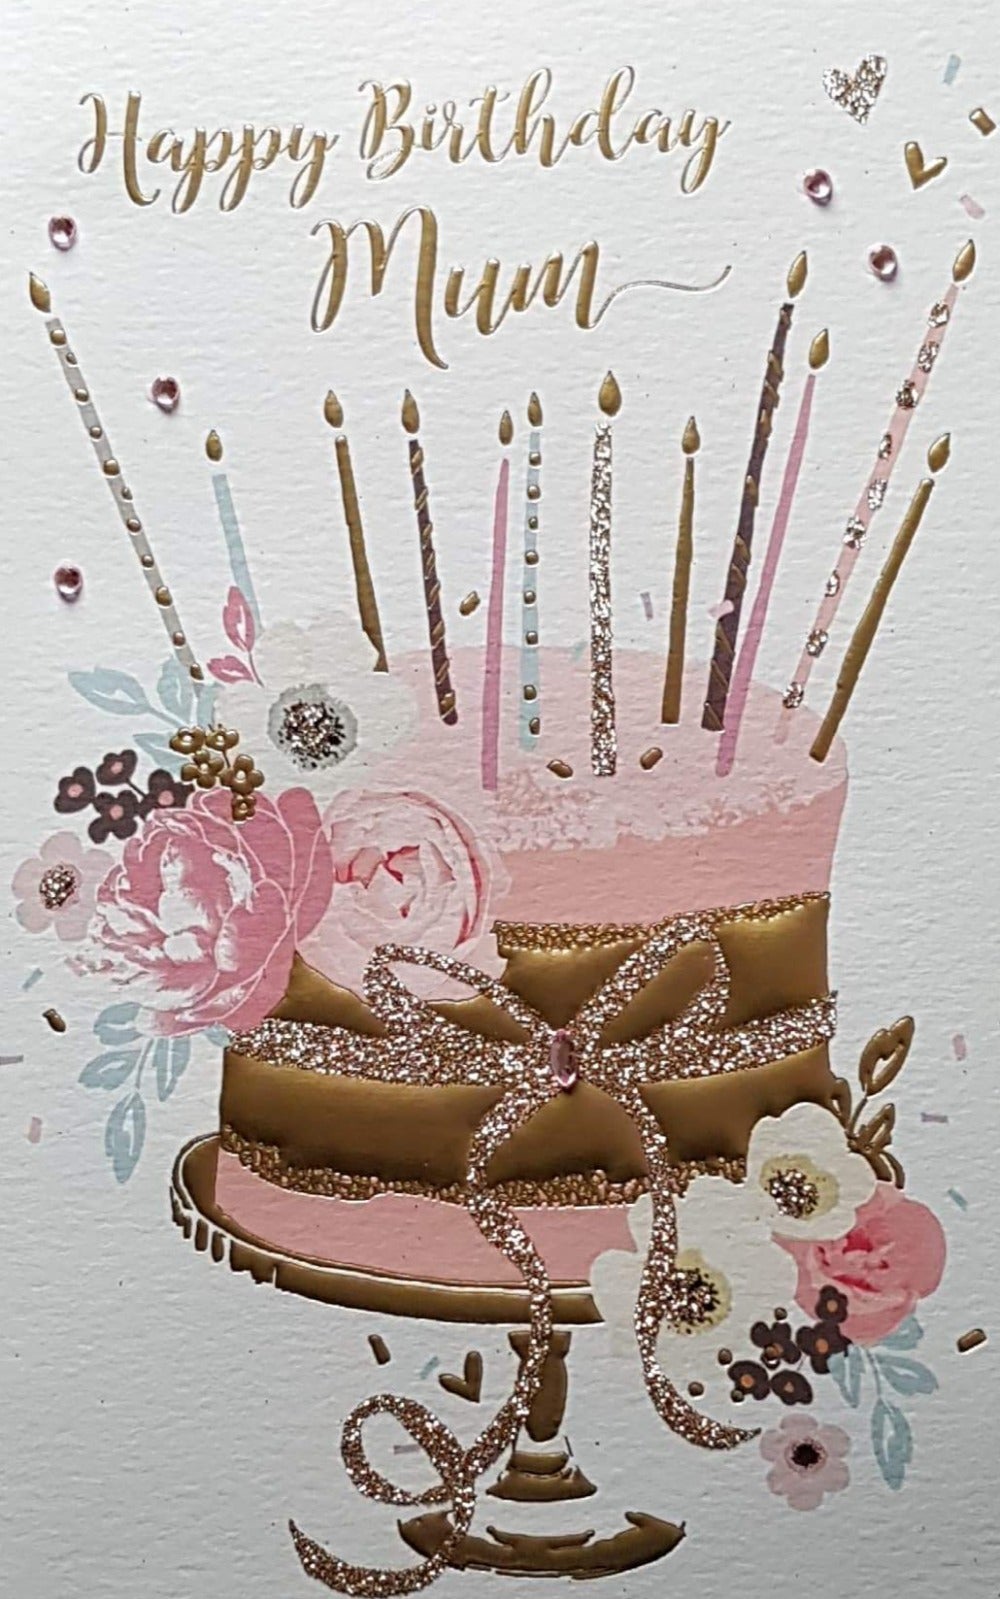 Birthday Card - Mum / A Fabulous Cake On The Cake Stand